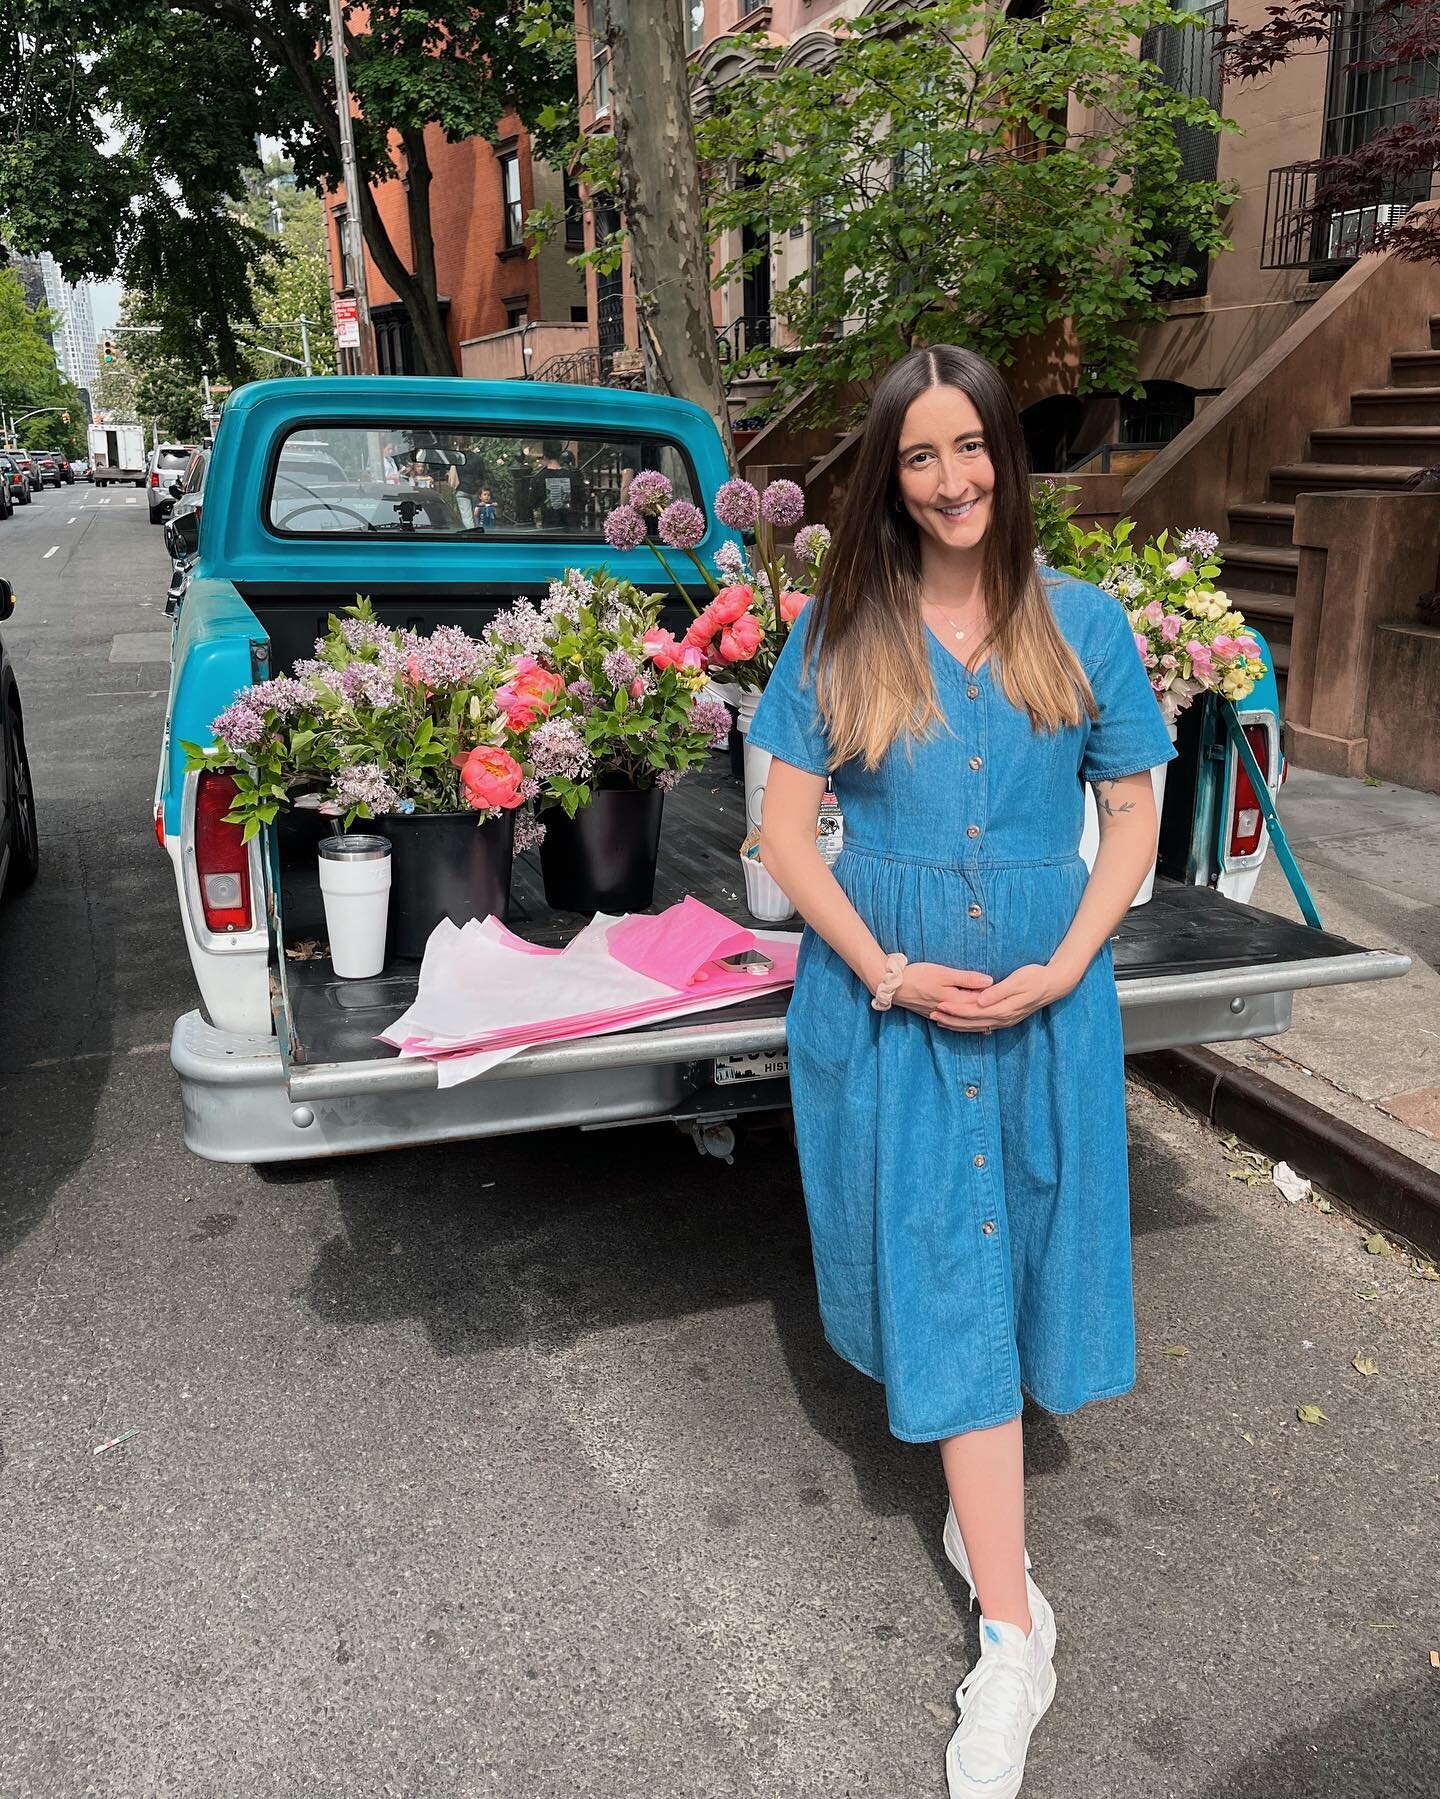 Happy Mother&rsquo;s Day to all the mamas and mama-figures. It was so fun to flower for you yesterday at my last pop up before welcoming my first little one in June. Excited to teach my little guy the magic of flowers. 💞